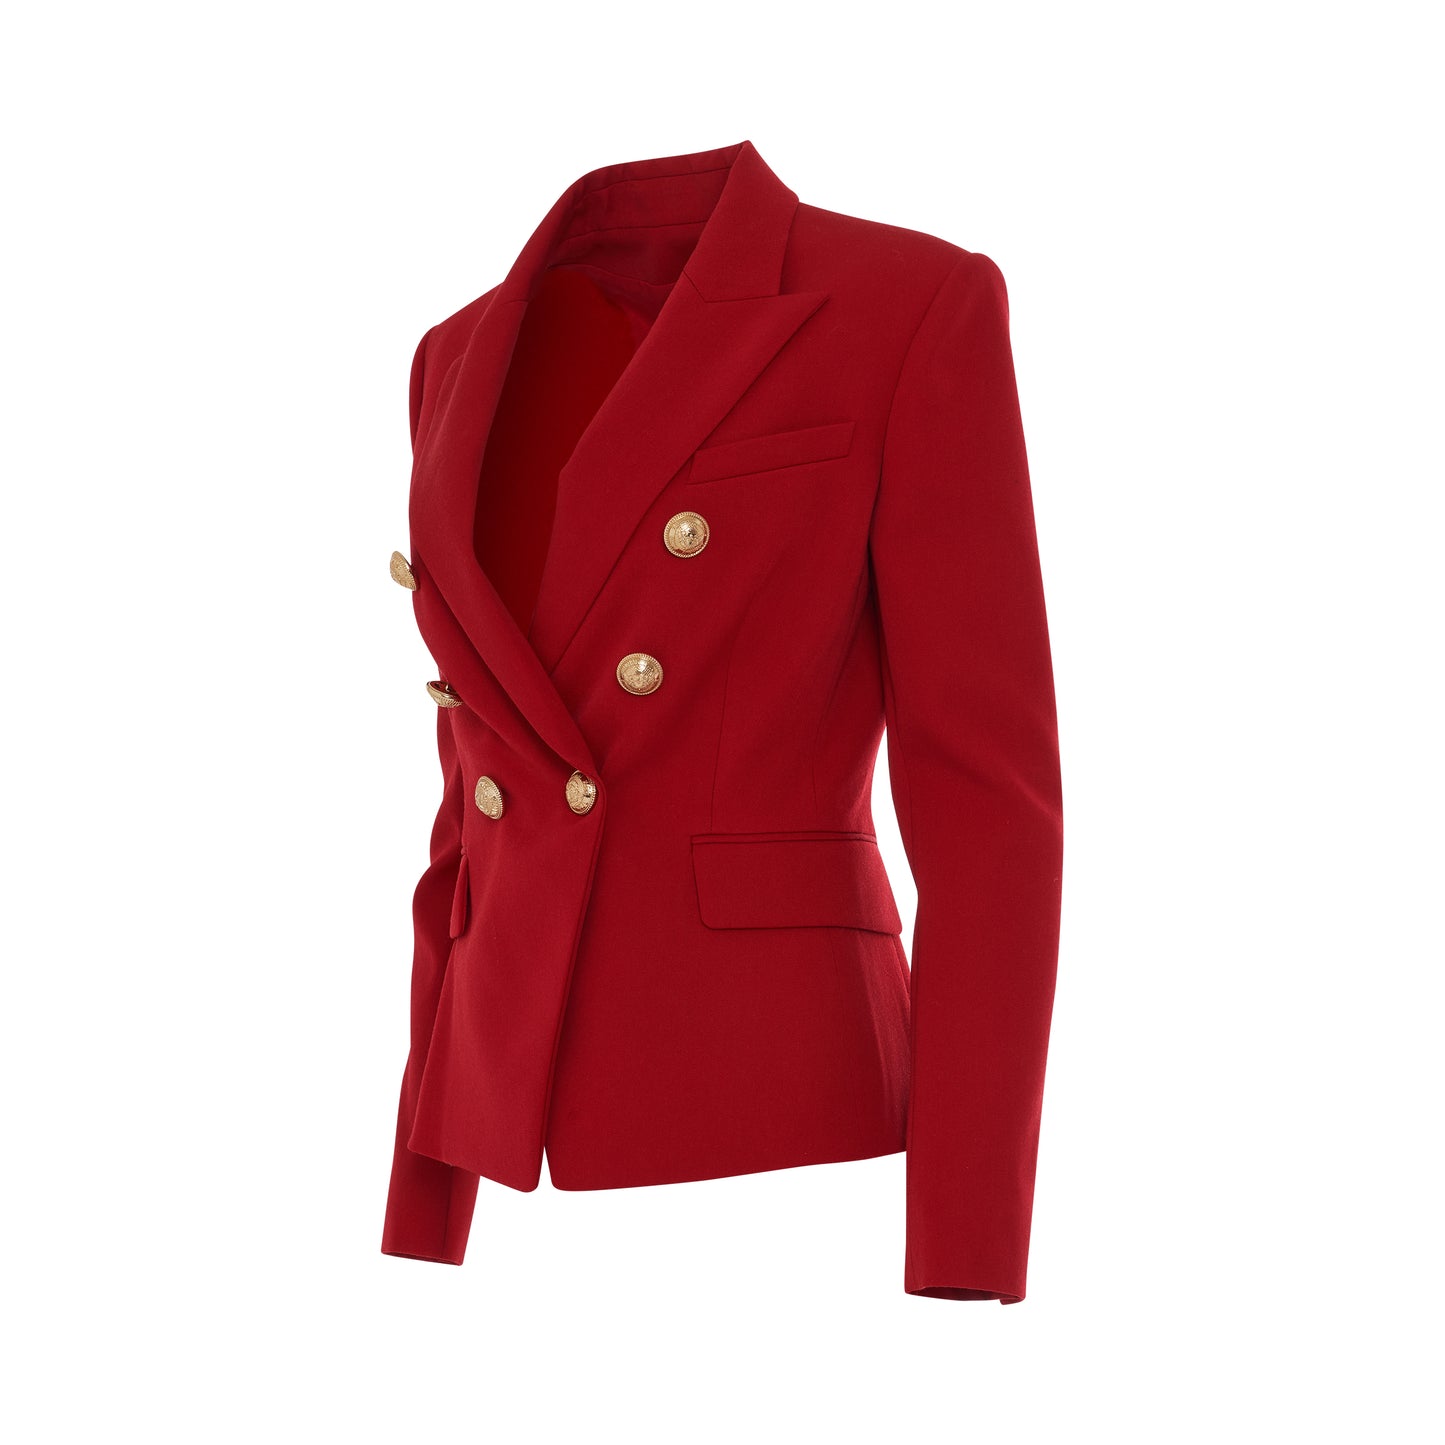 6 Button Grain De Poudre Fitted Jacket in Red